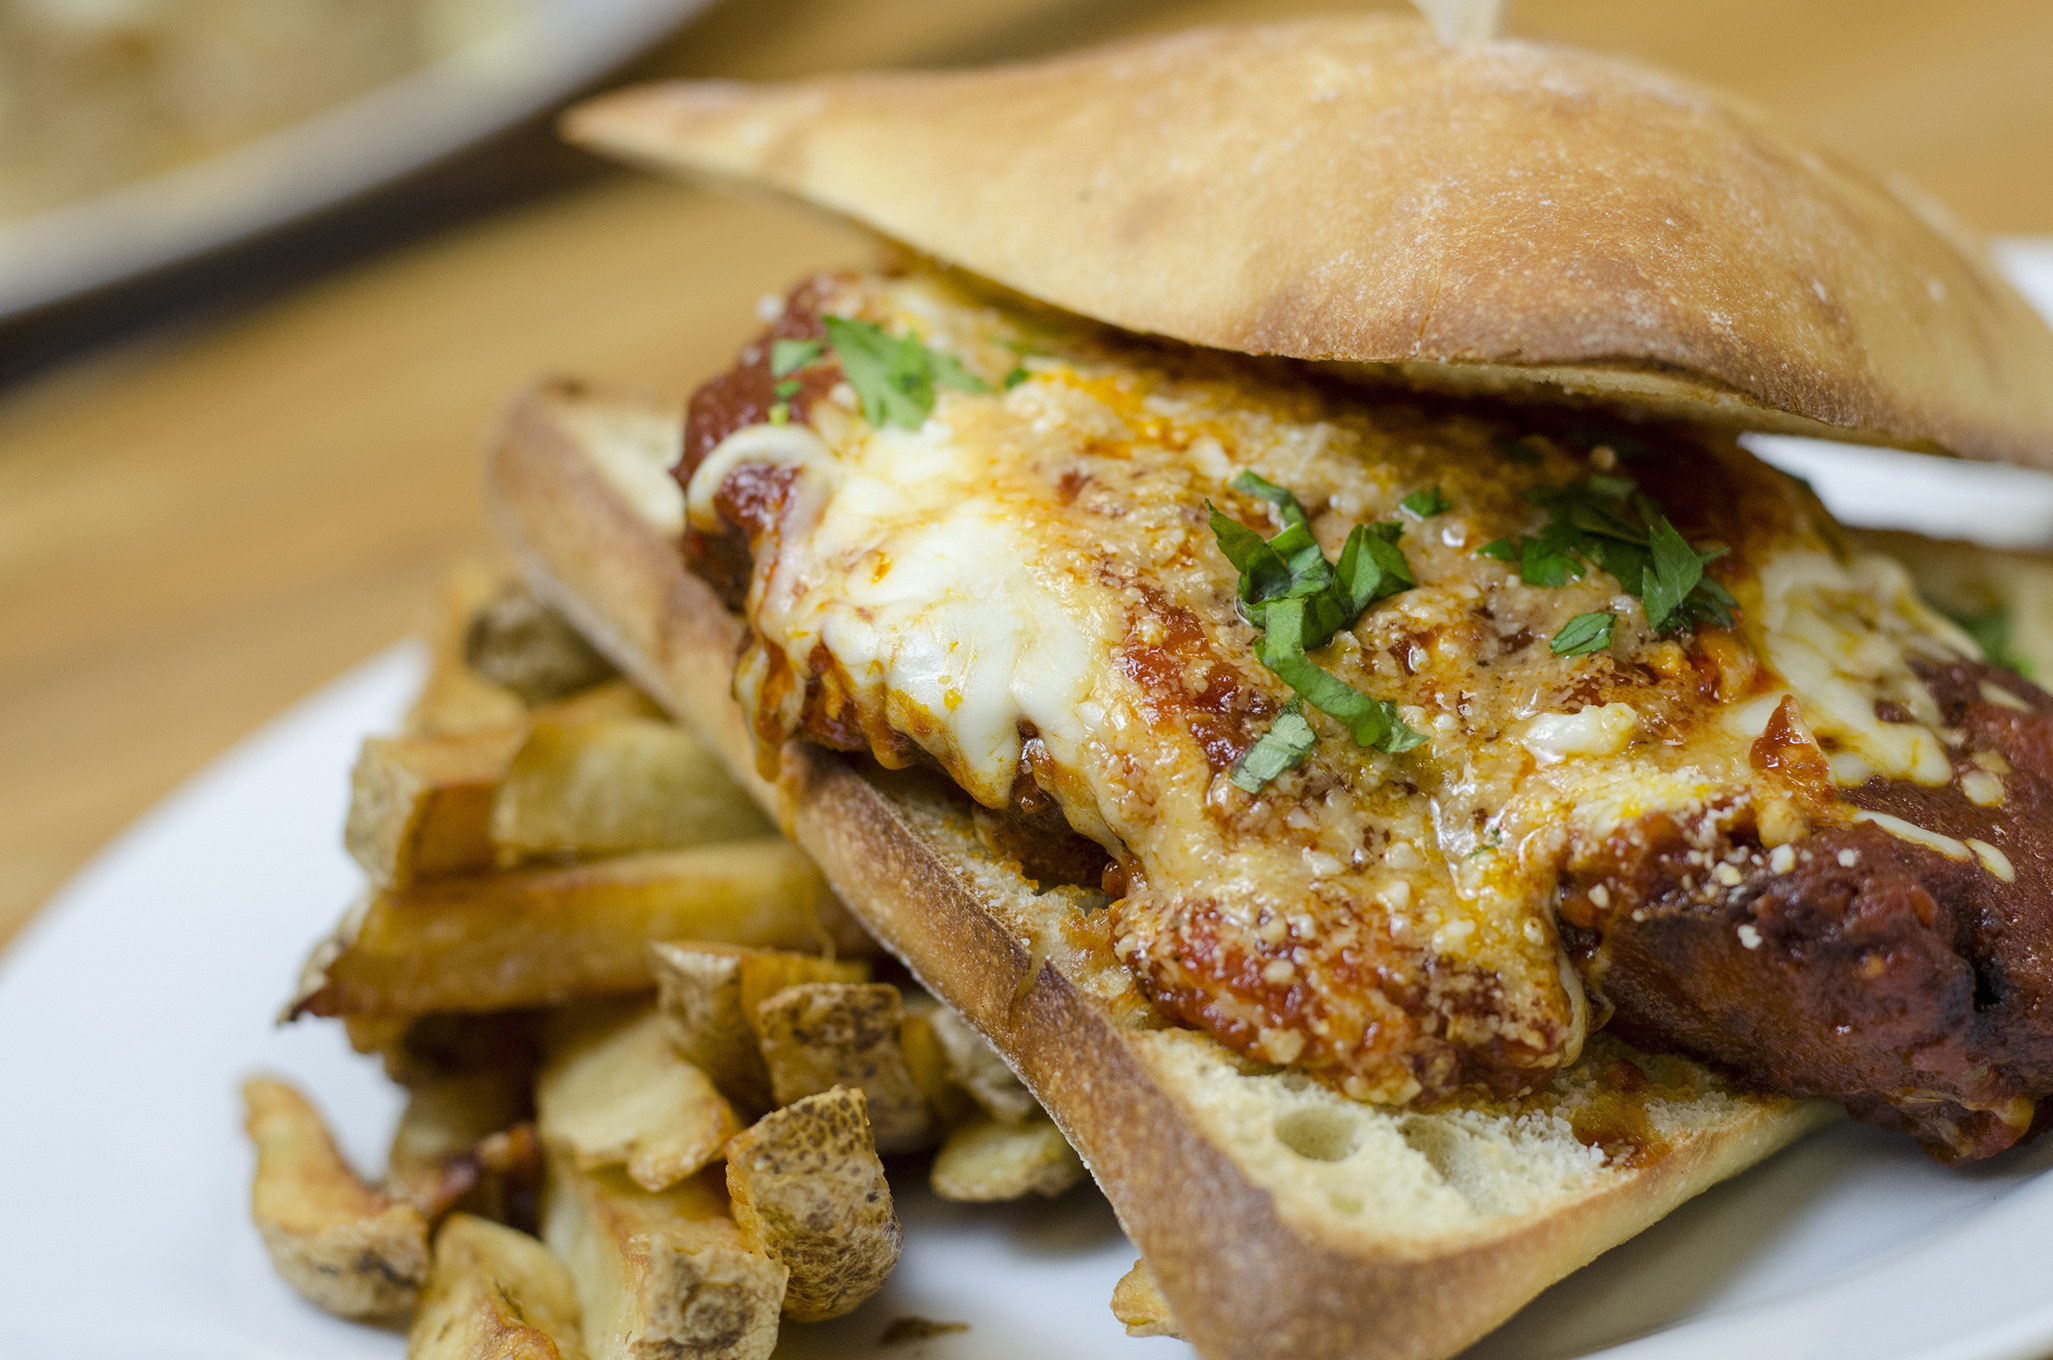 Chicken Parm Sandwich from Road Chef in Windsor, Ontario.